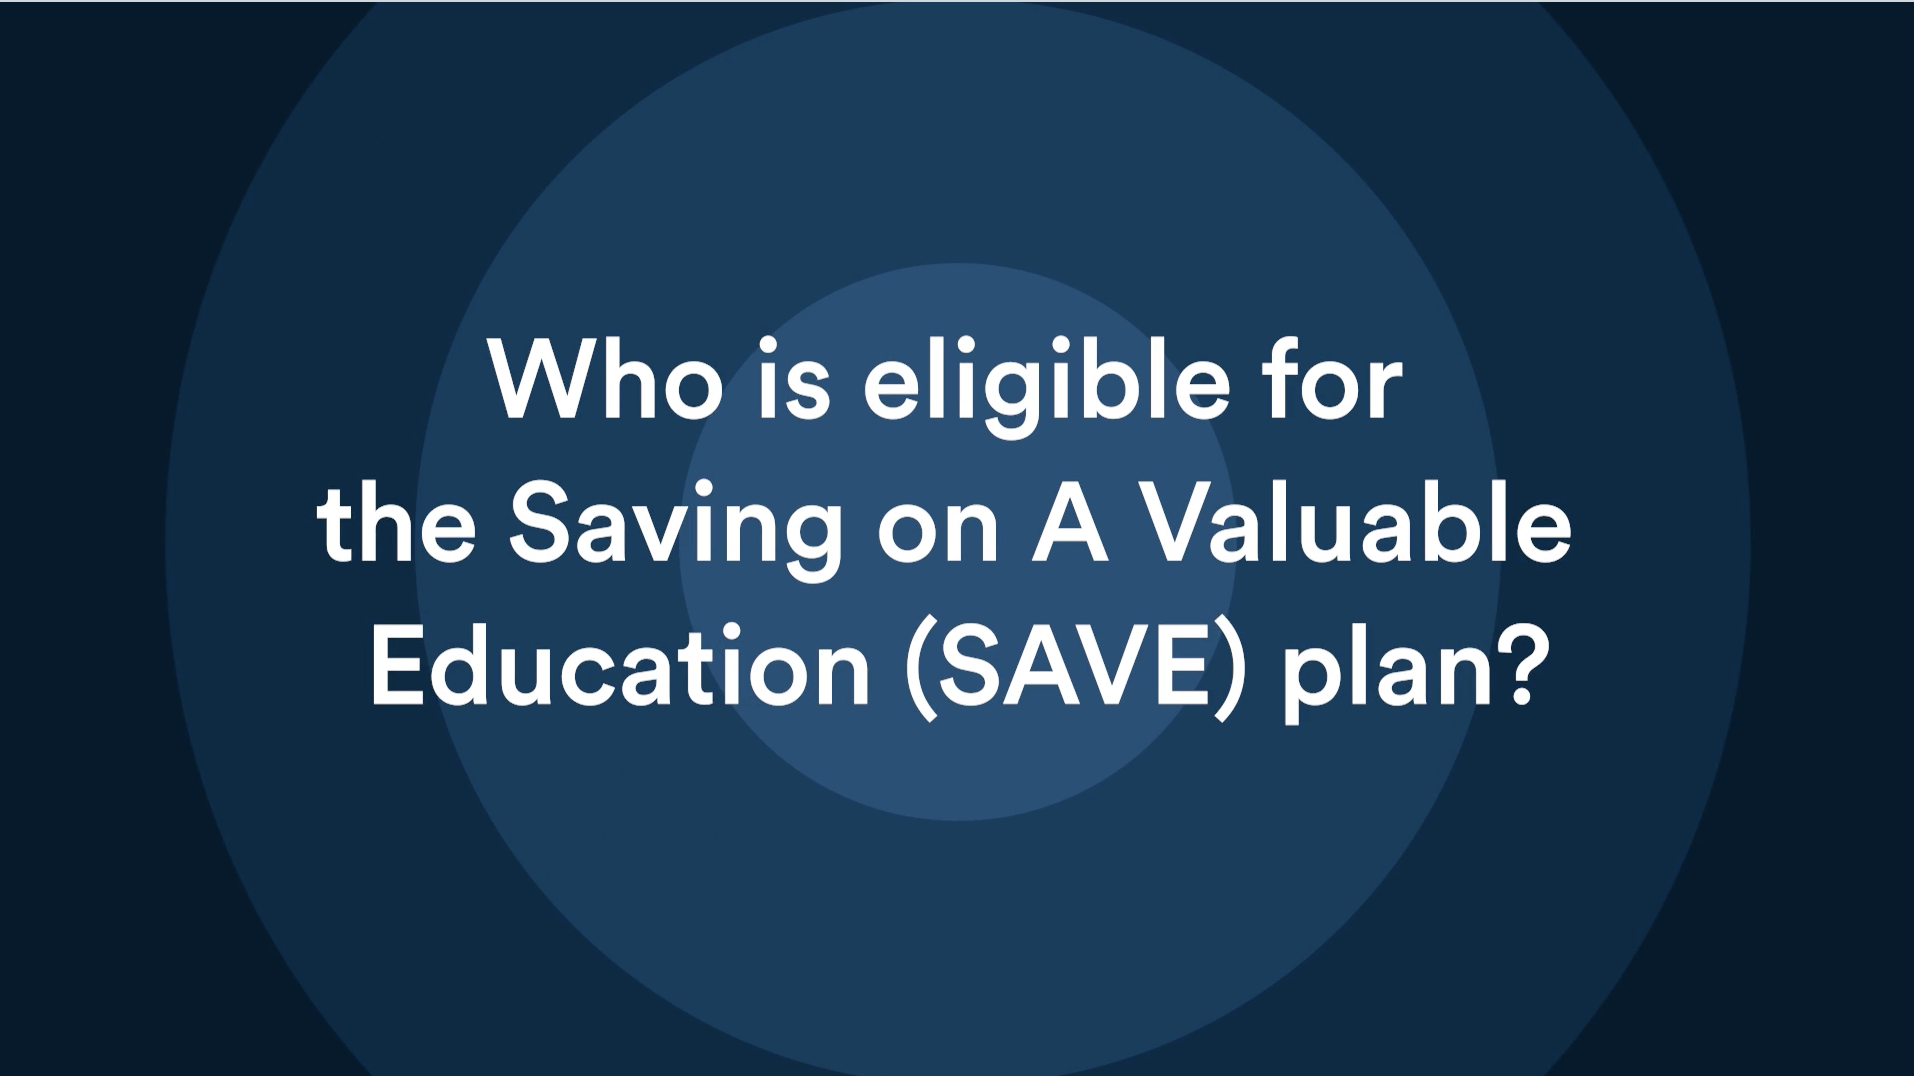 Who is eligible for the SAVE Plan